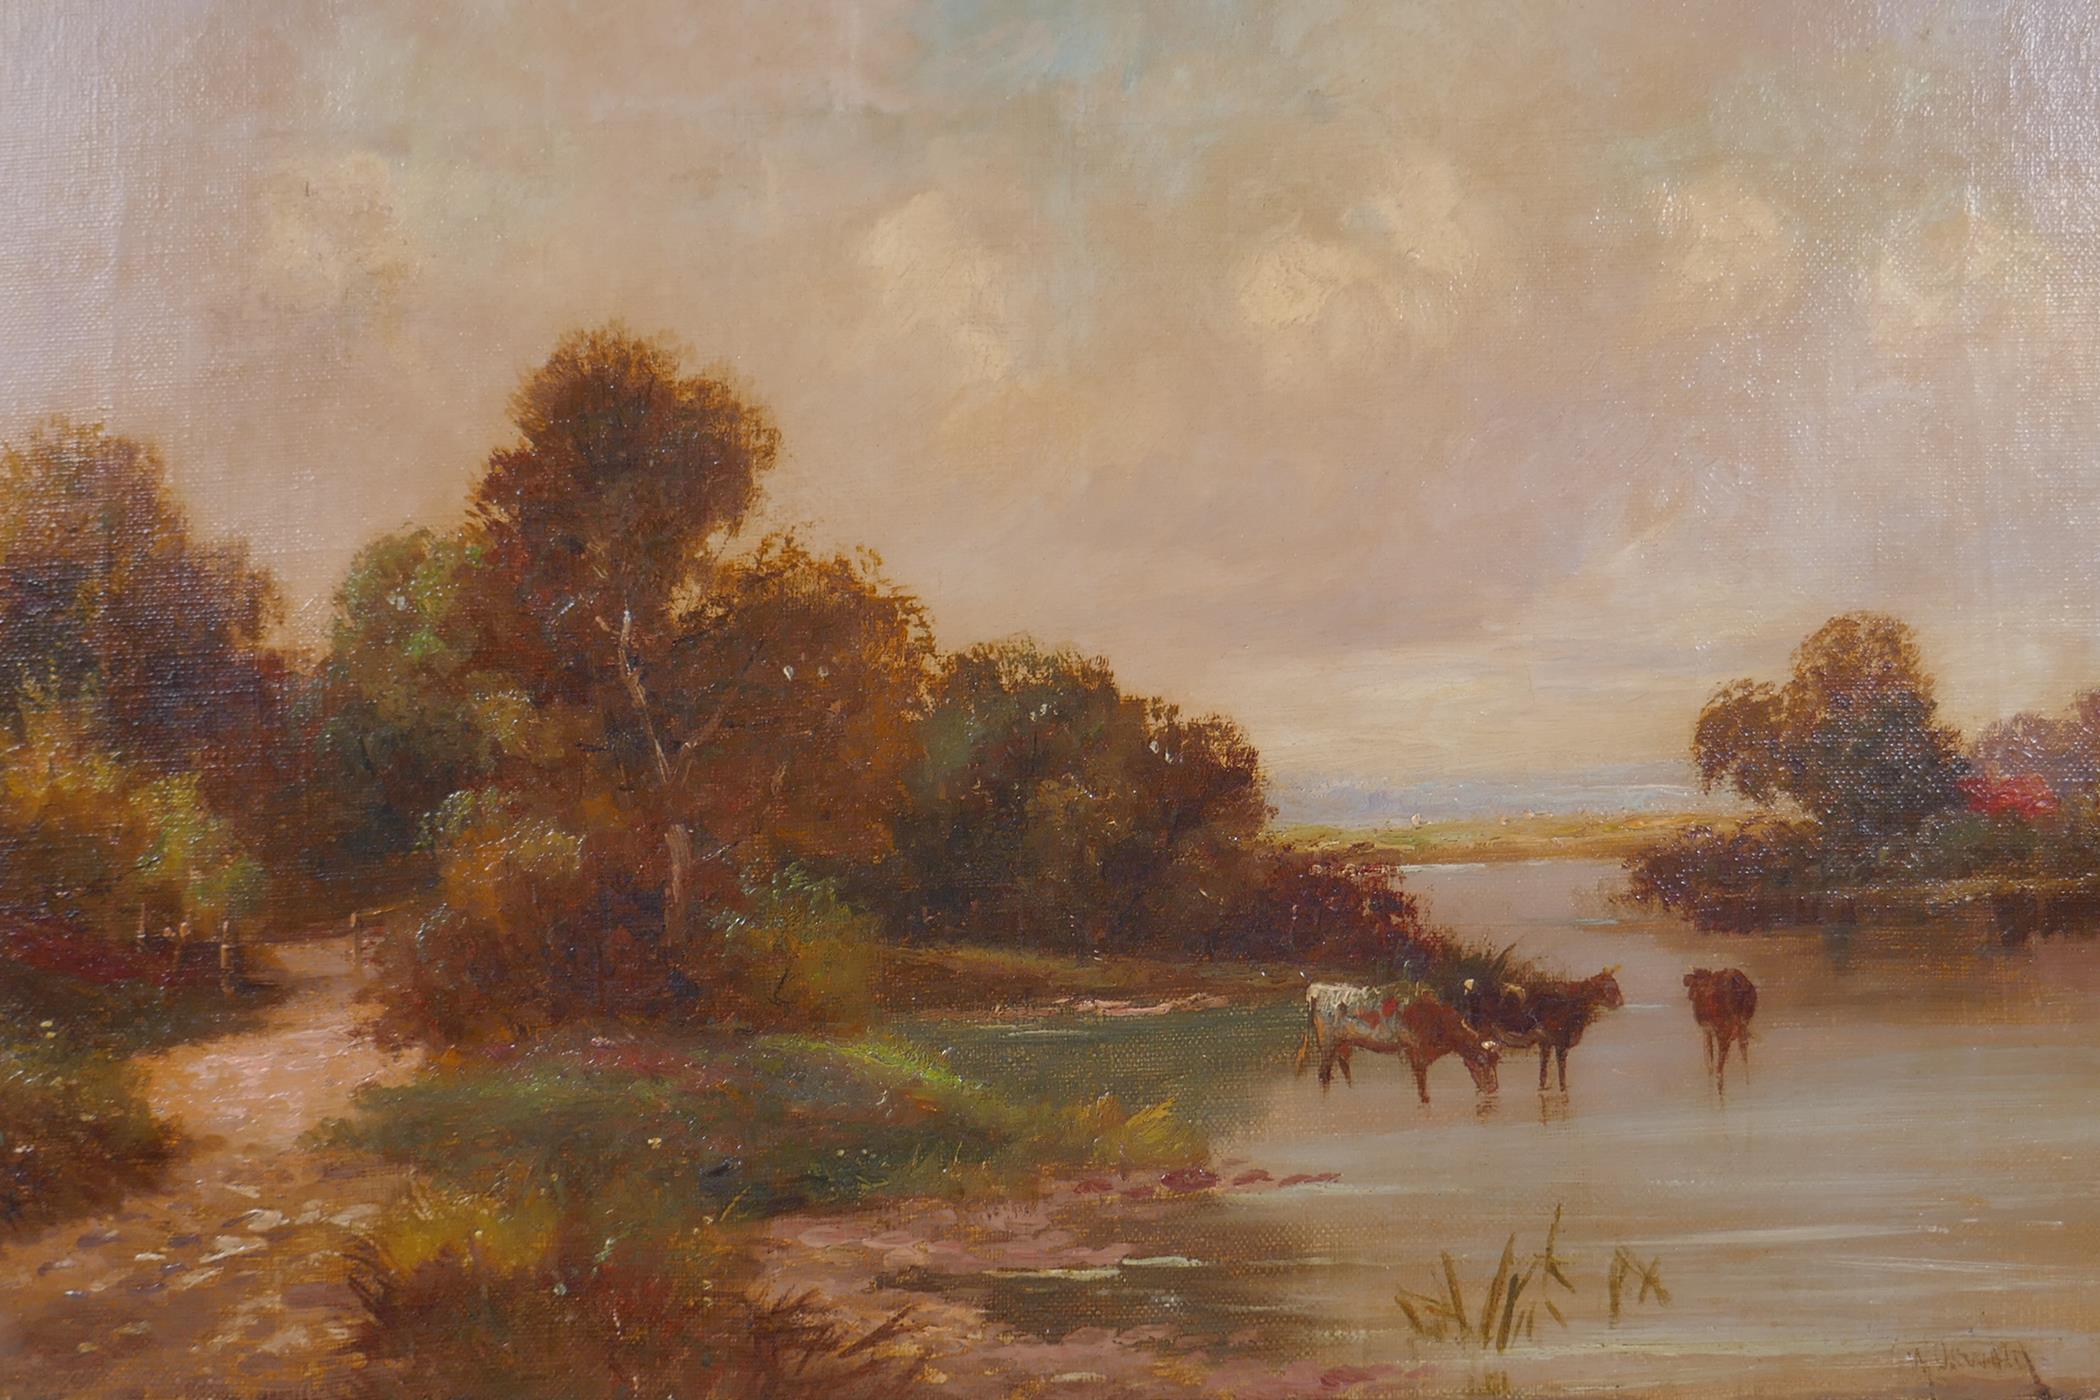 C.W. Oswald, river landscape with cattle, unframed, oil on canvas, signed, 31 x 45cm